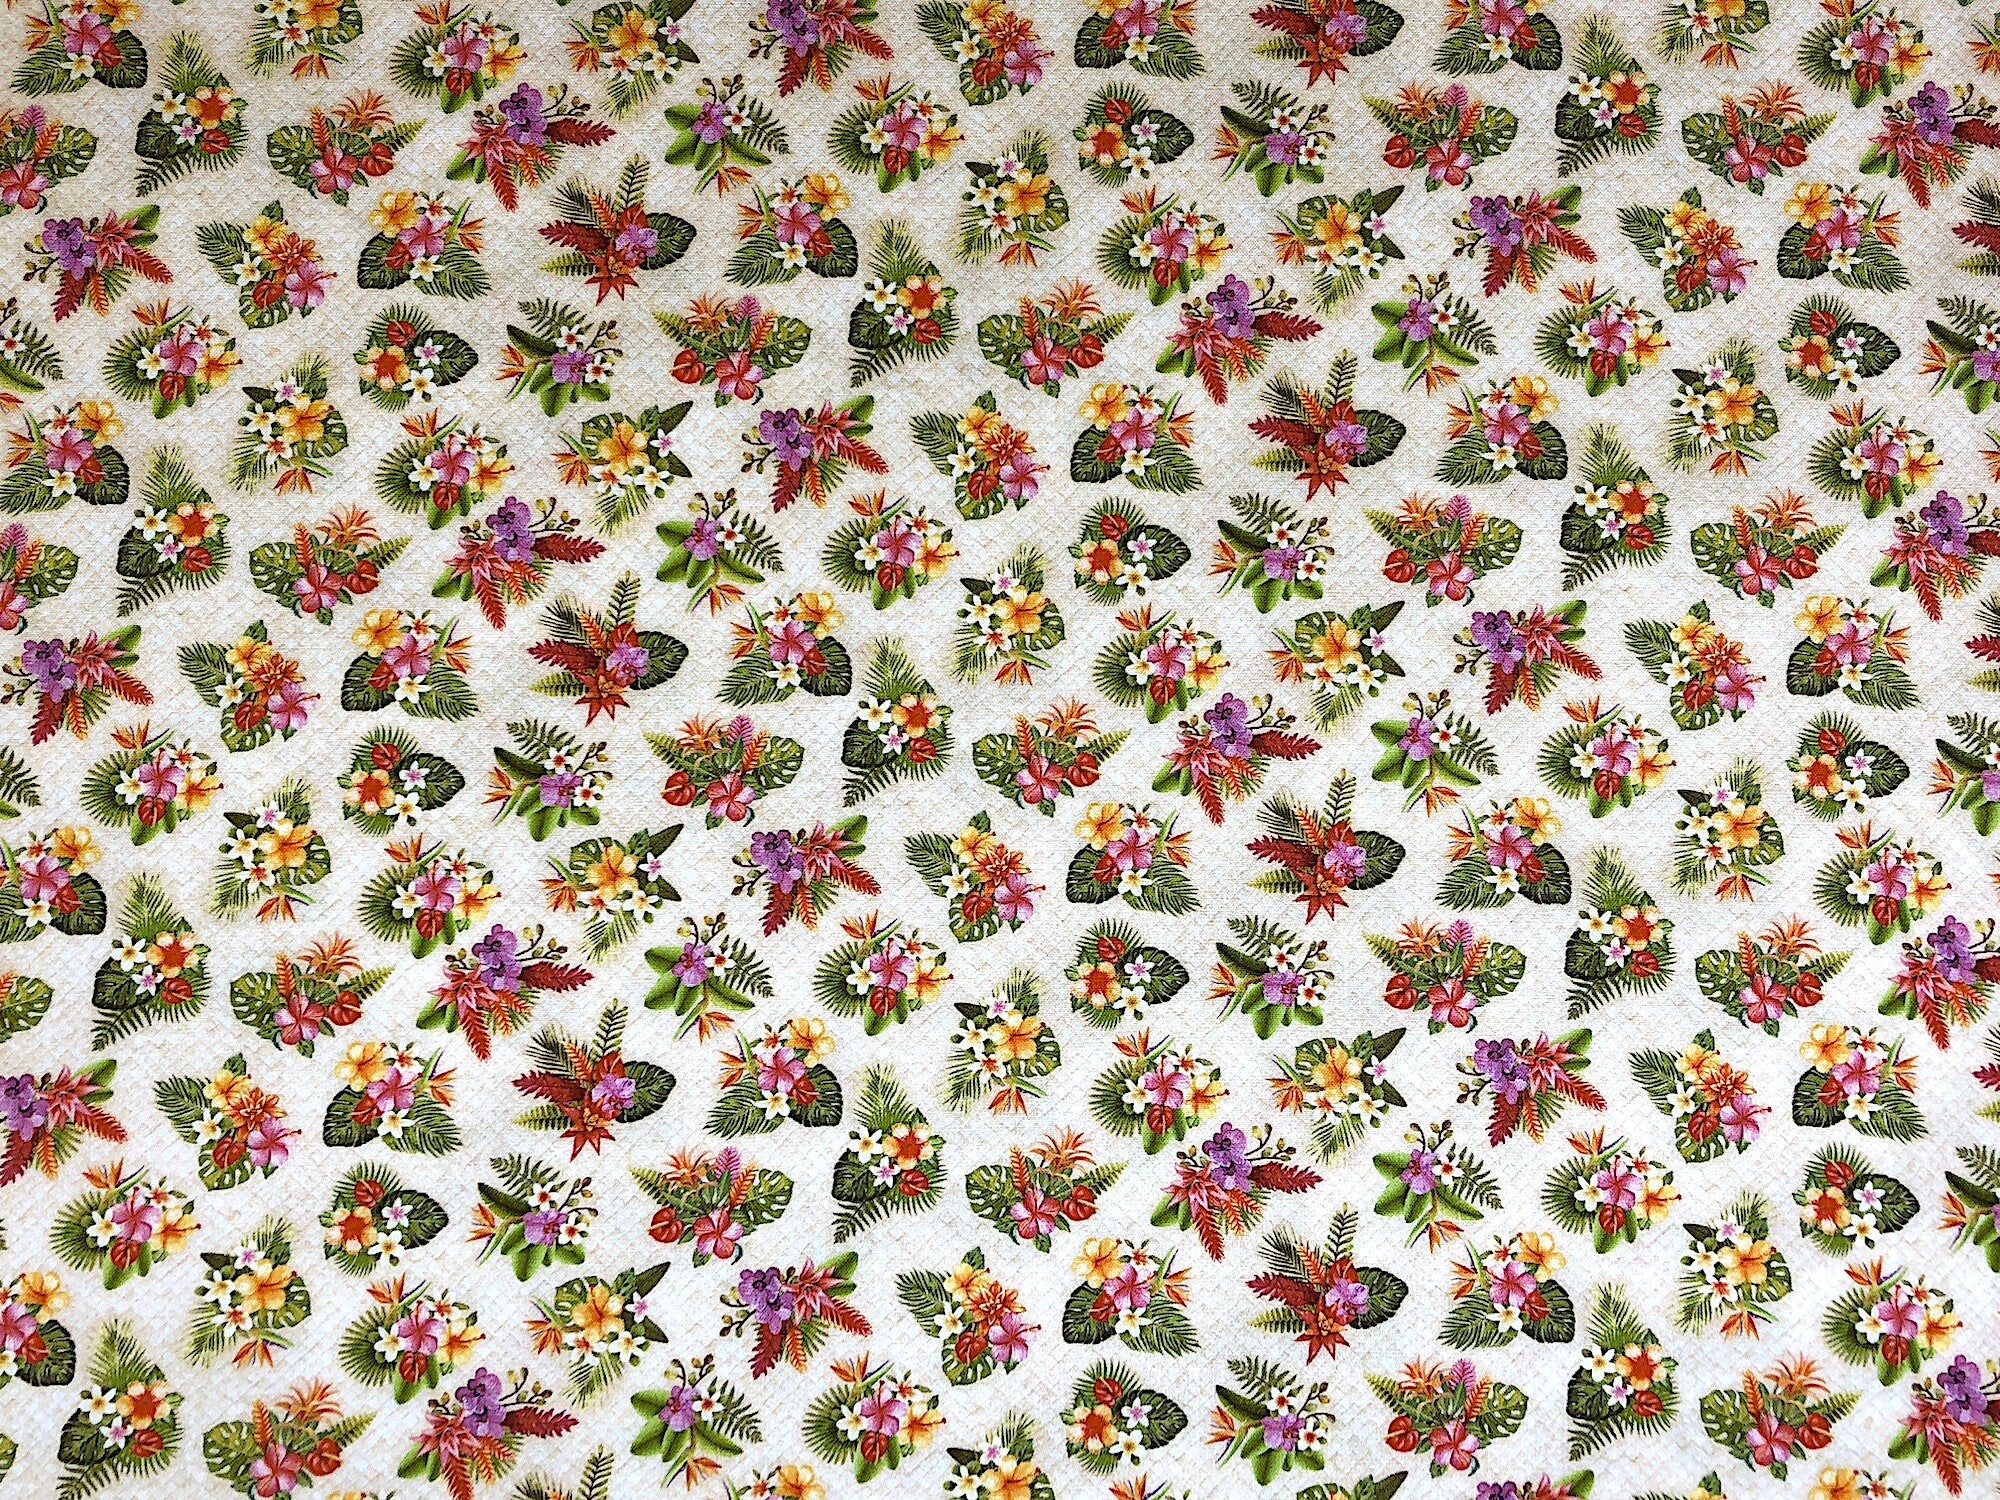 This fabric is a pretty tropical floral print with a light beige background. There are small flowers in groupings along with ferns and leaves.